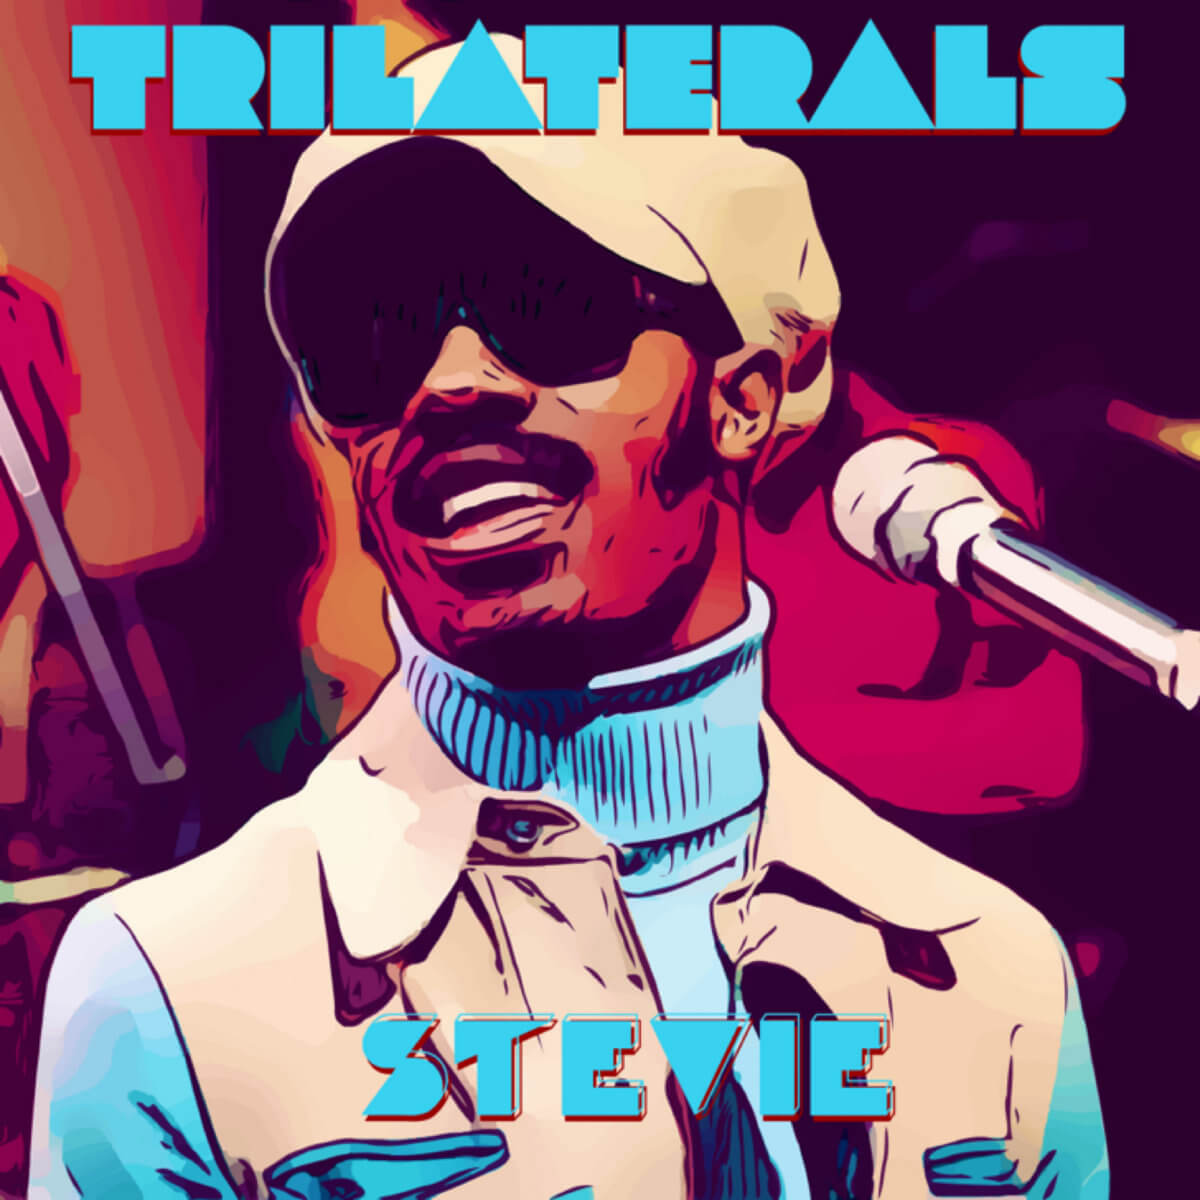 49fc50eb ed57 4d52 9aa1 1a0a649316f5 » new song by The Trilaterals